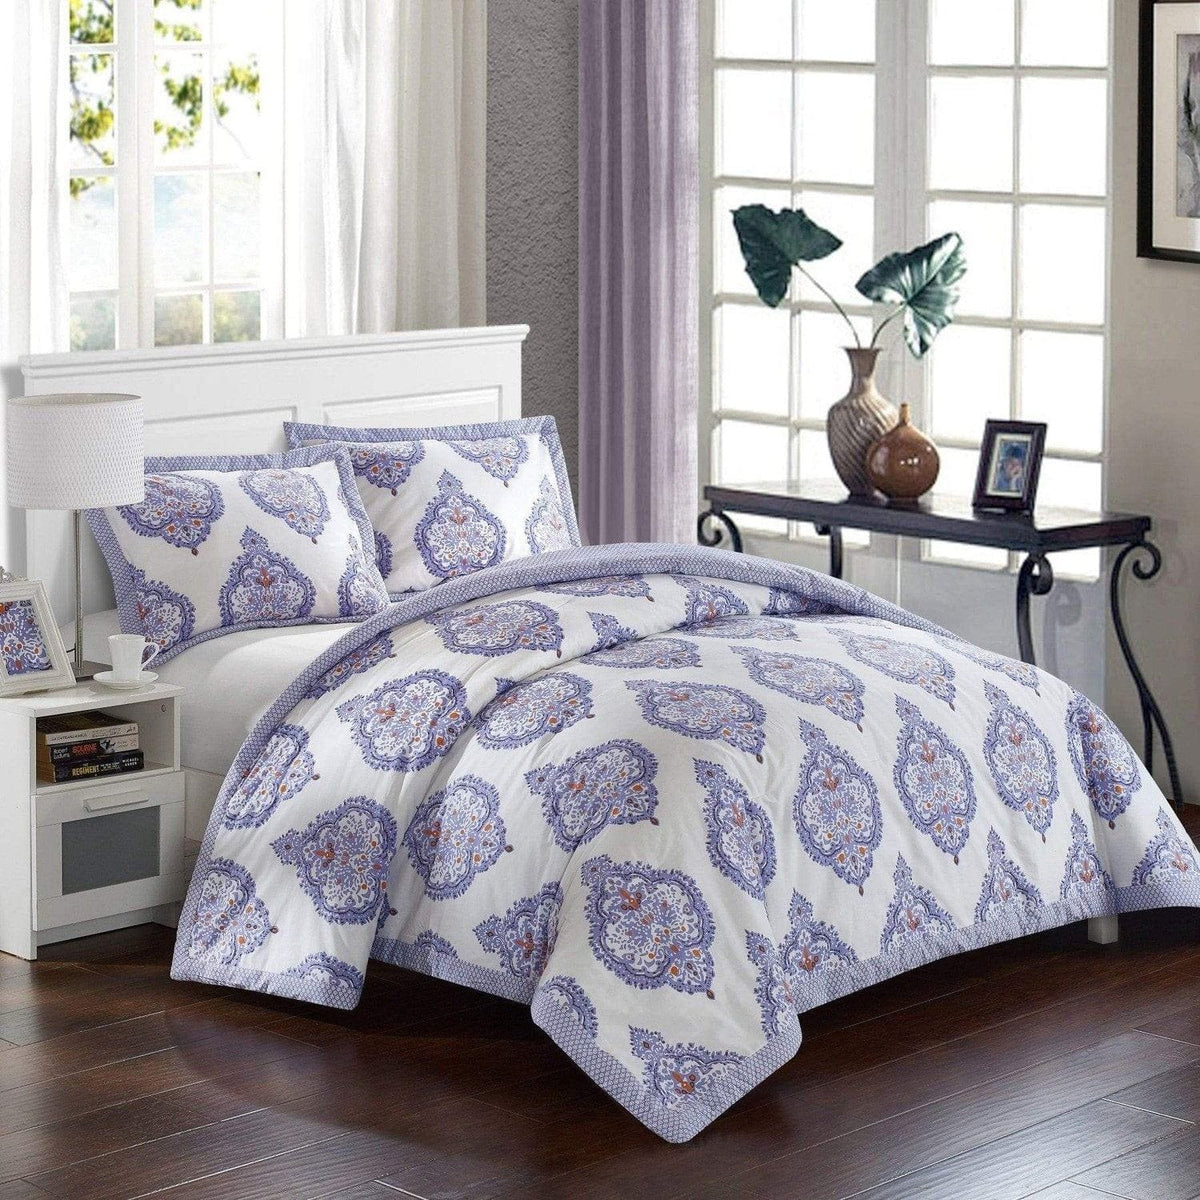 Chic Home Grand Palace 3 Piece 100% Cotton Comforter Set Reversible Global Inspired Print Lavender Twin XL